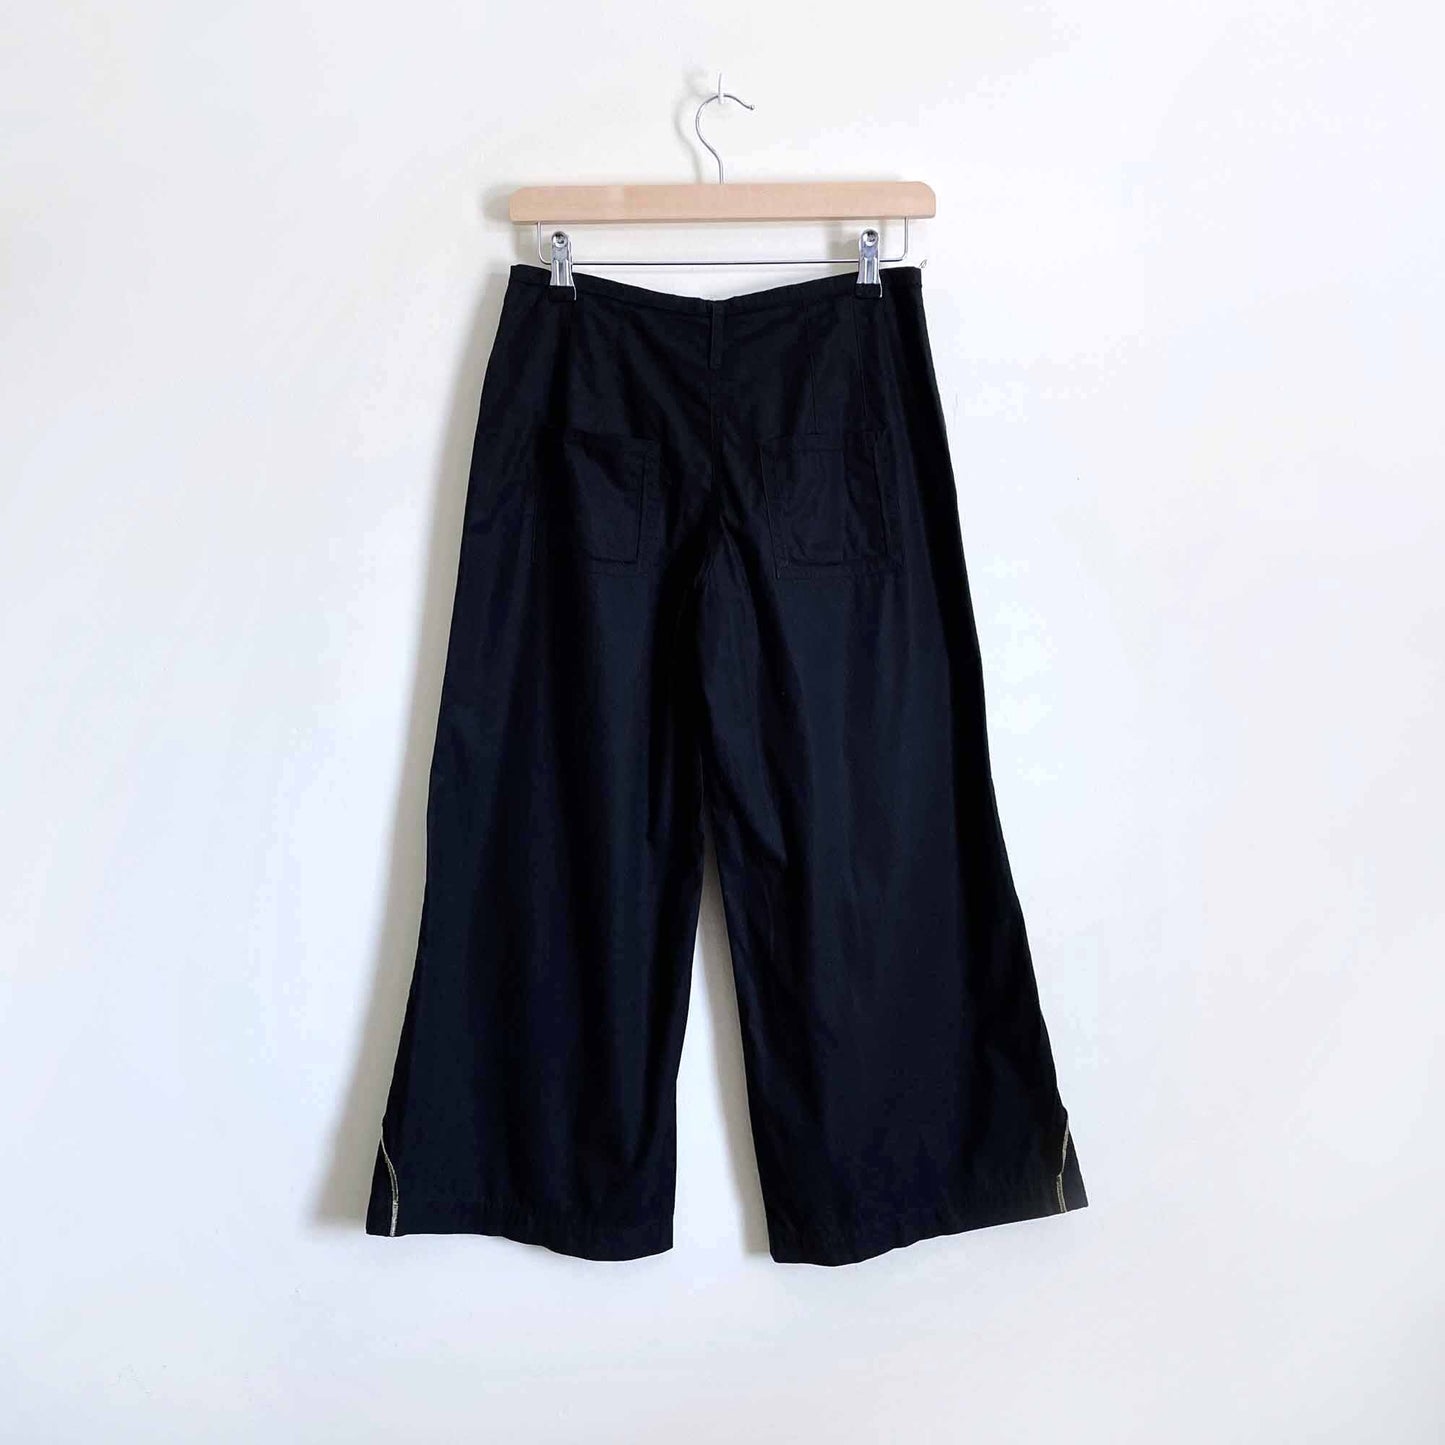 Vintage Sonia Rykiel high rise cropped pants with gold thread - size 36